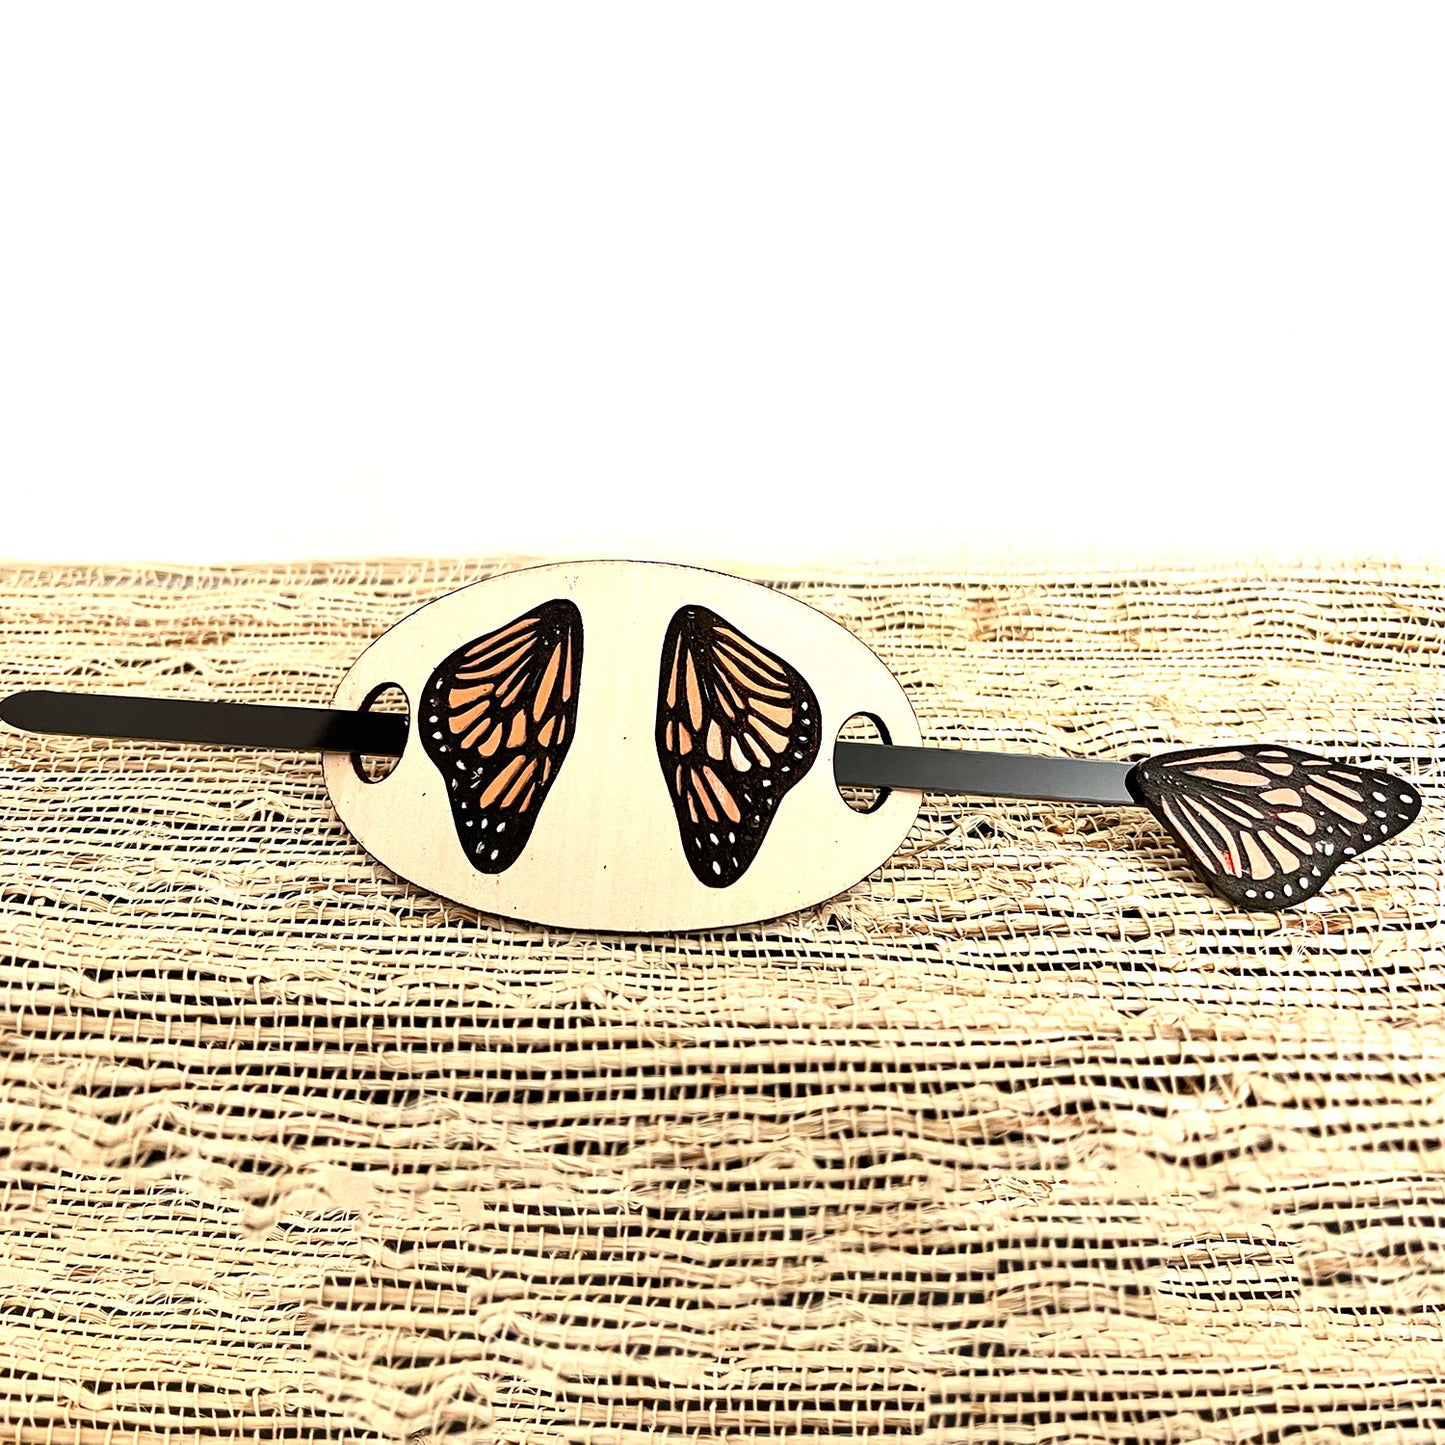 Butterfly Leather Hair Tie With Hair Stick